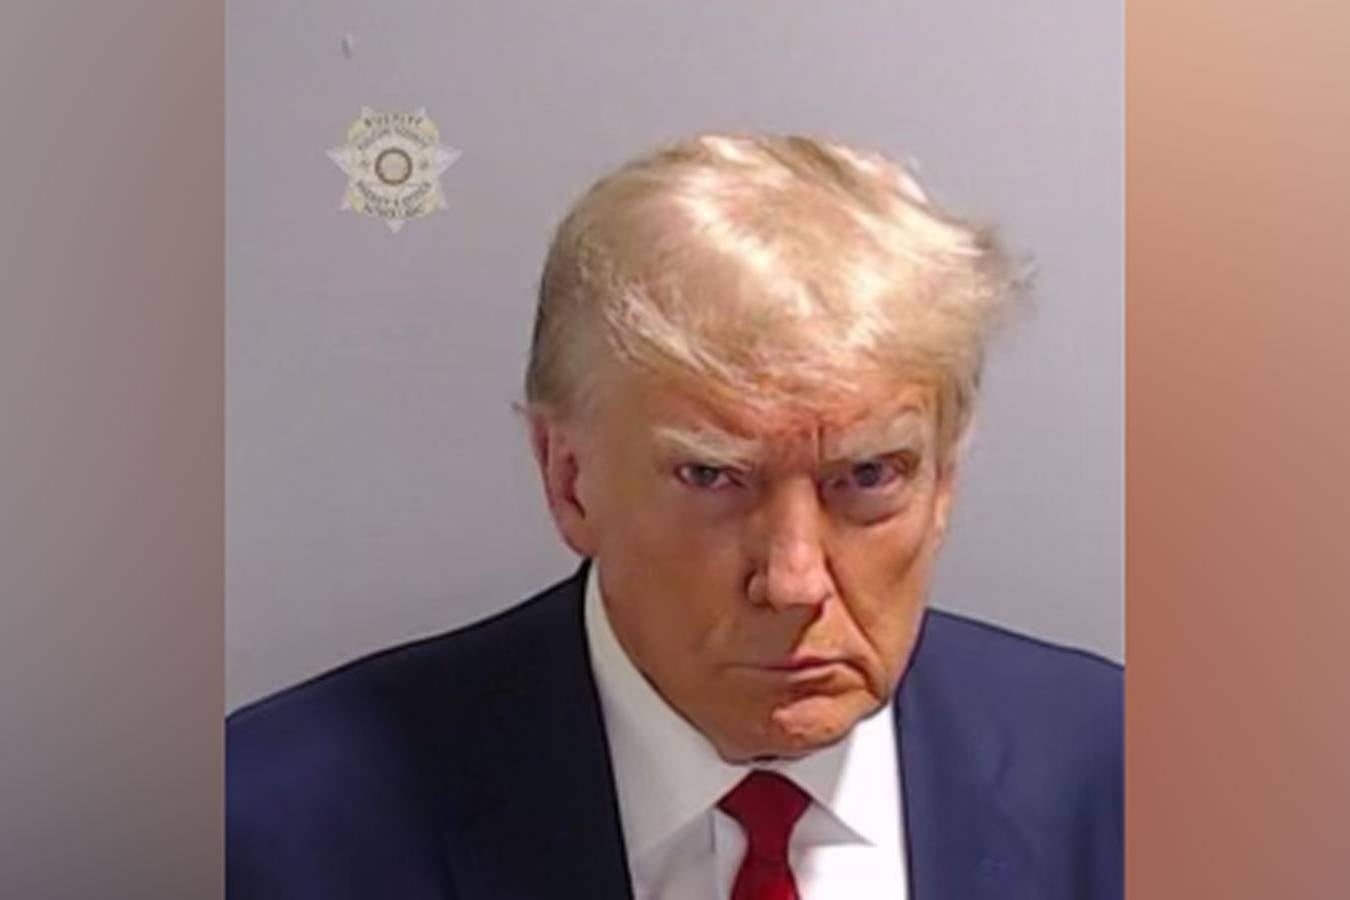 Donald Trump’s booking photo after he surrendered at Fulton County Jail in Atlanta, Georgia